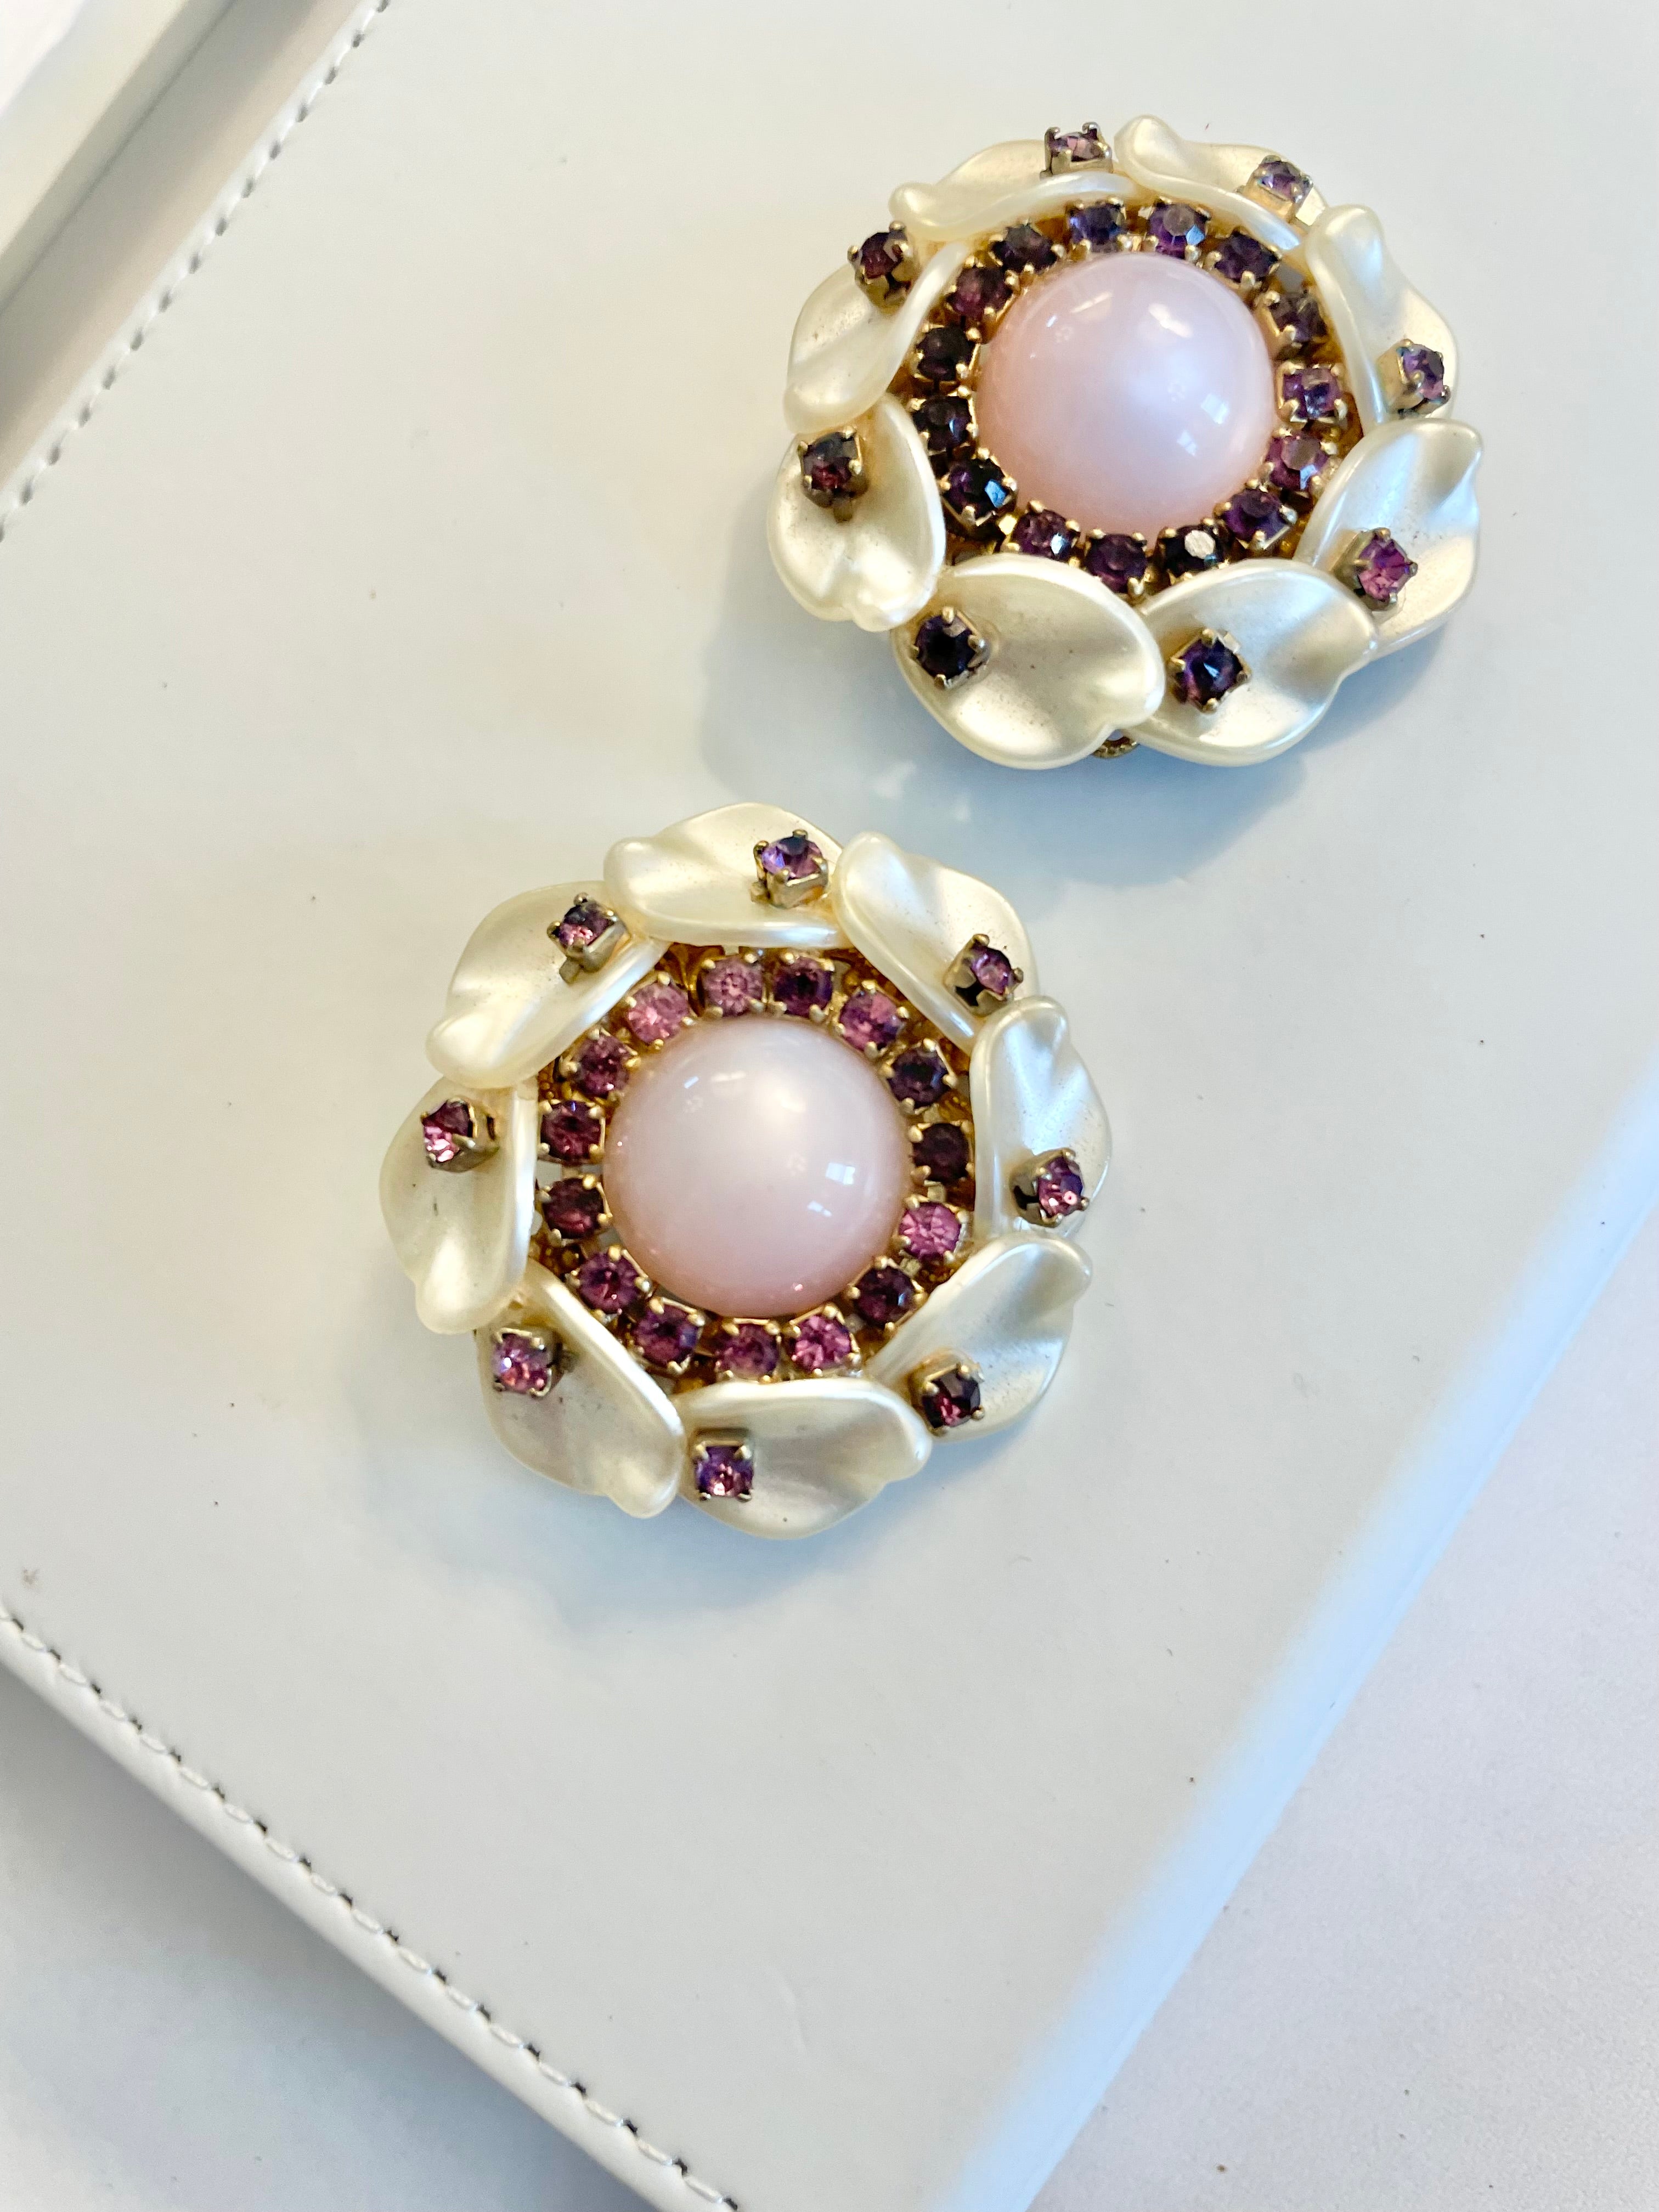 Vintage 1960's feminine, soft pink faux moonstone clip earrings, dusted with purple glass stones.. so divine